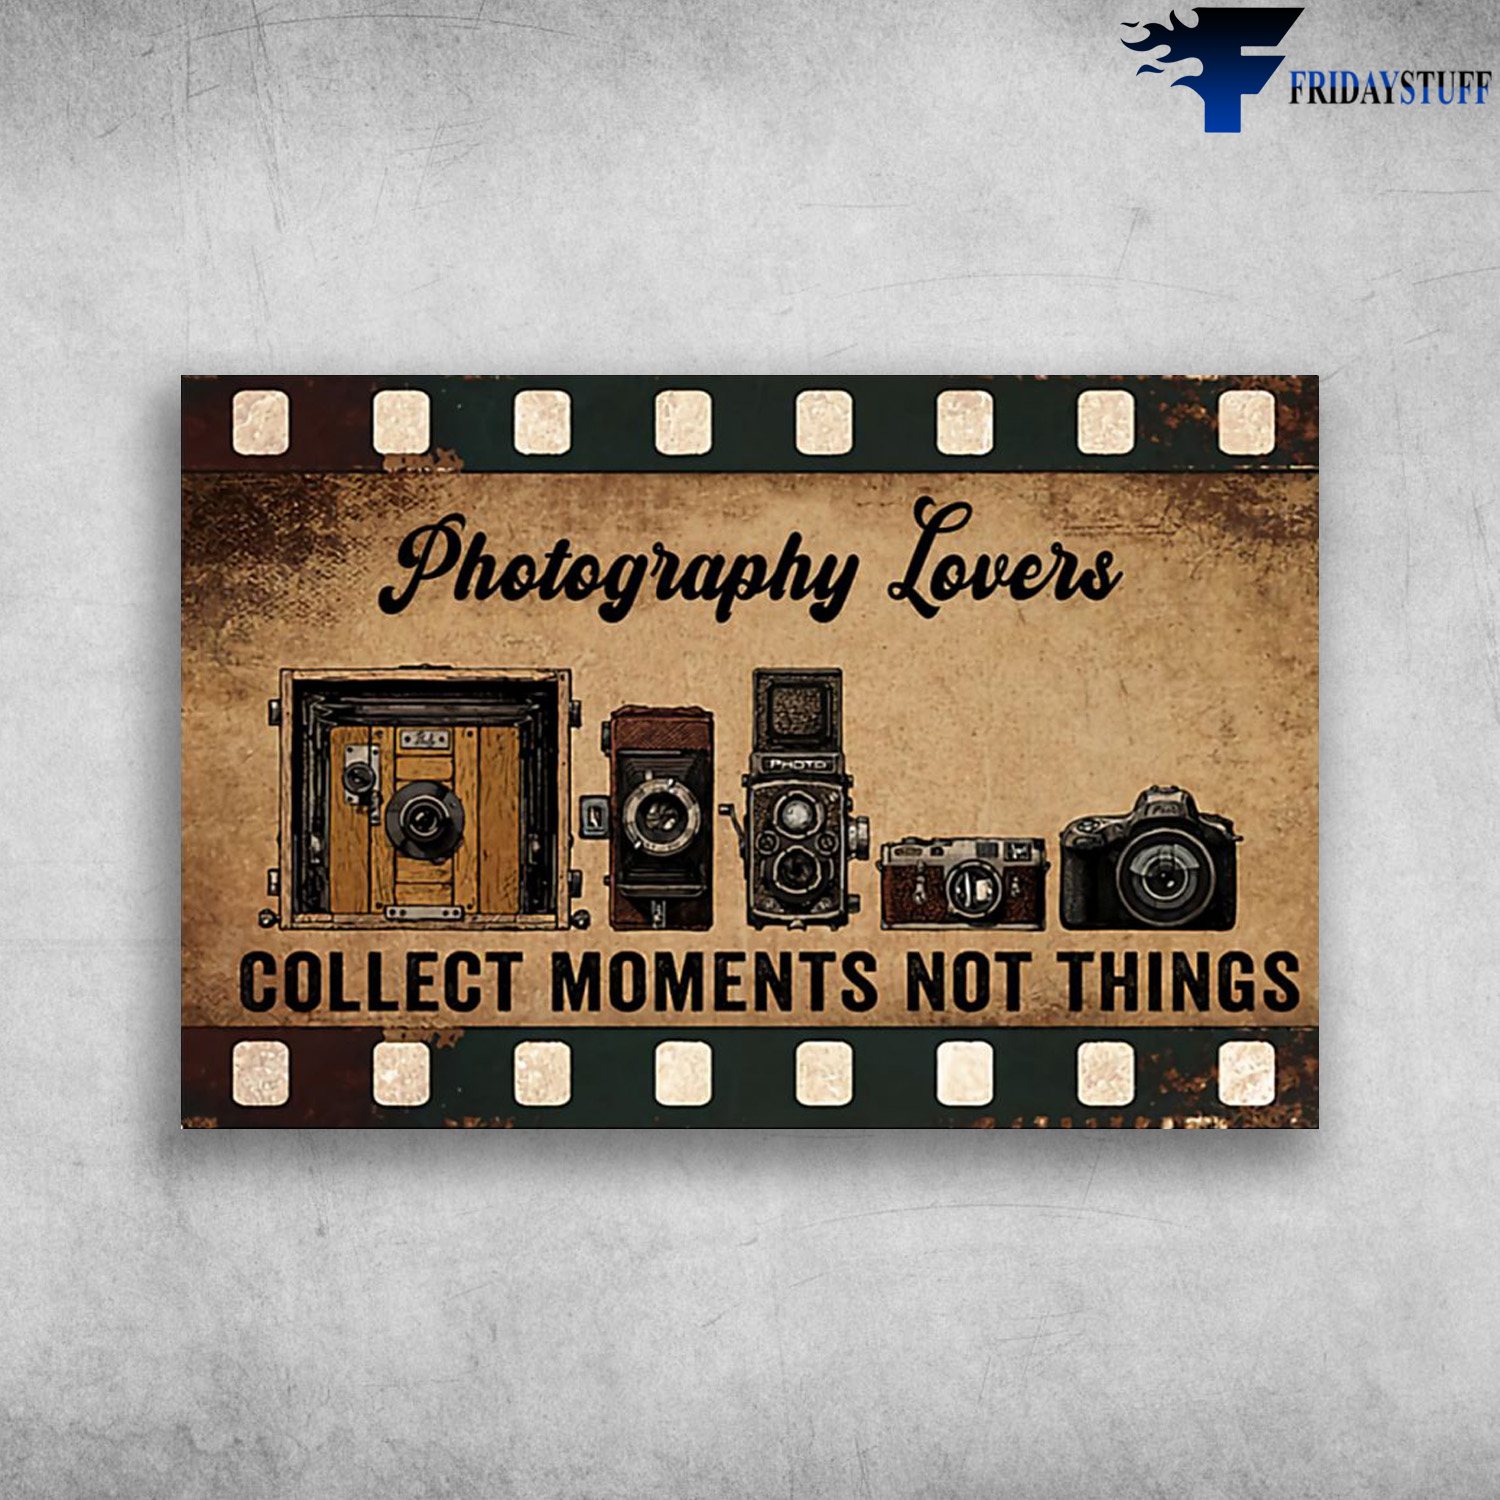 The Type Of Camera - Photograply Lovers, Collect Moments Not Things